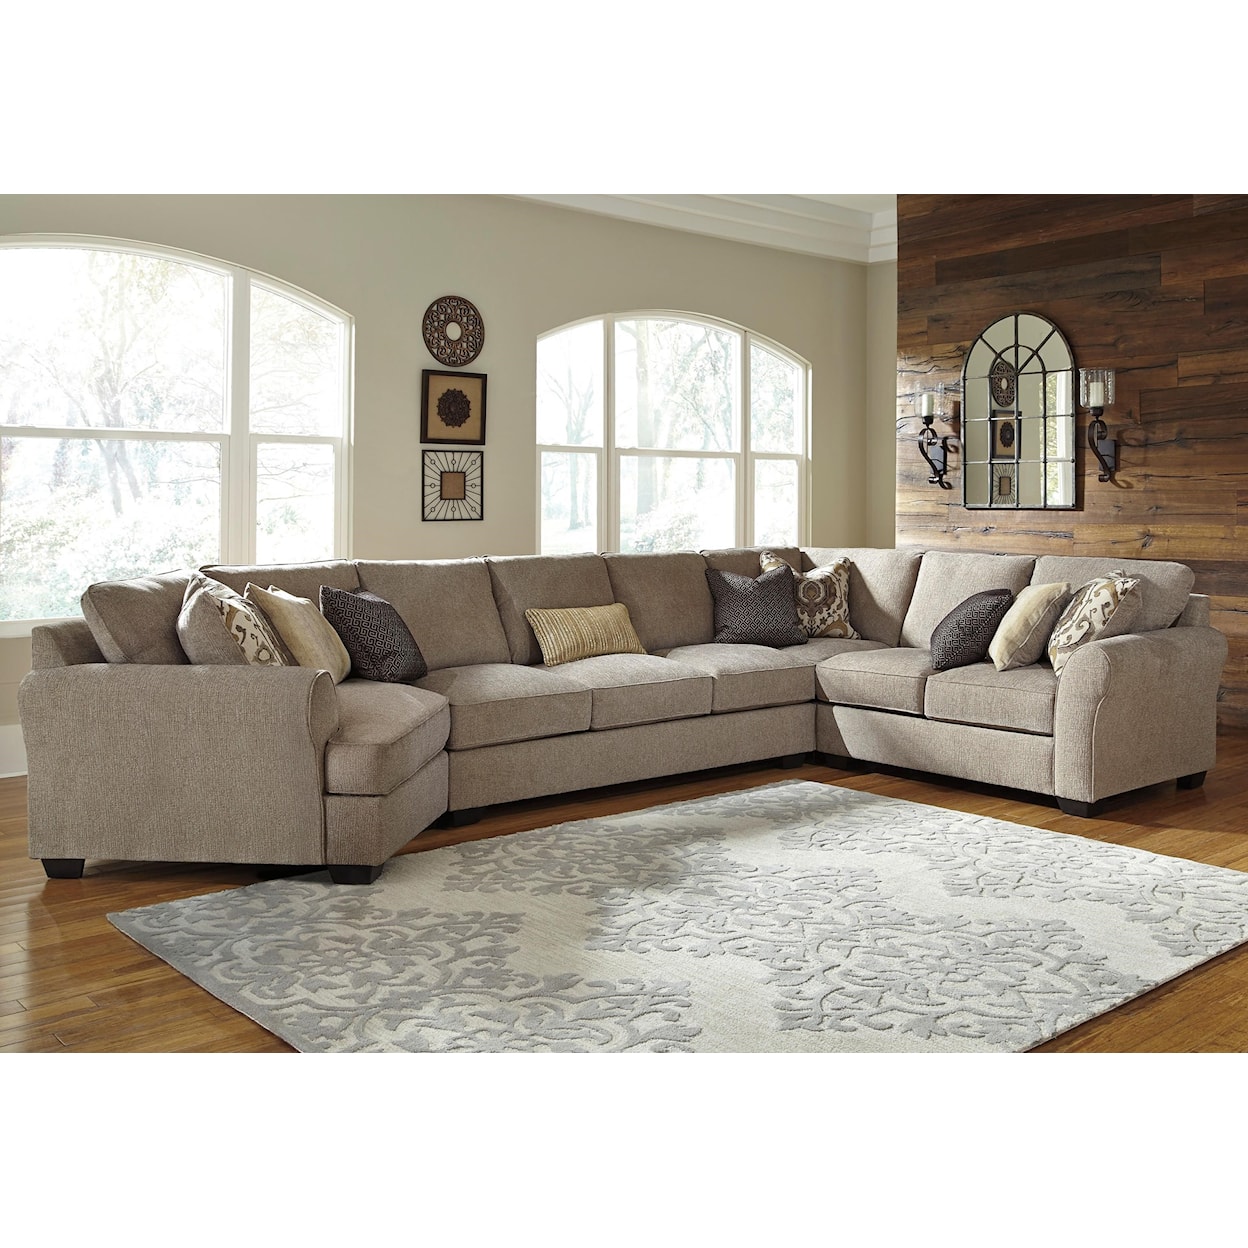 Benchcraft Pantomine 4-Piece Sectional with Cuddler